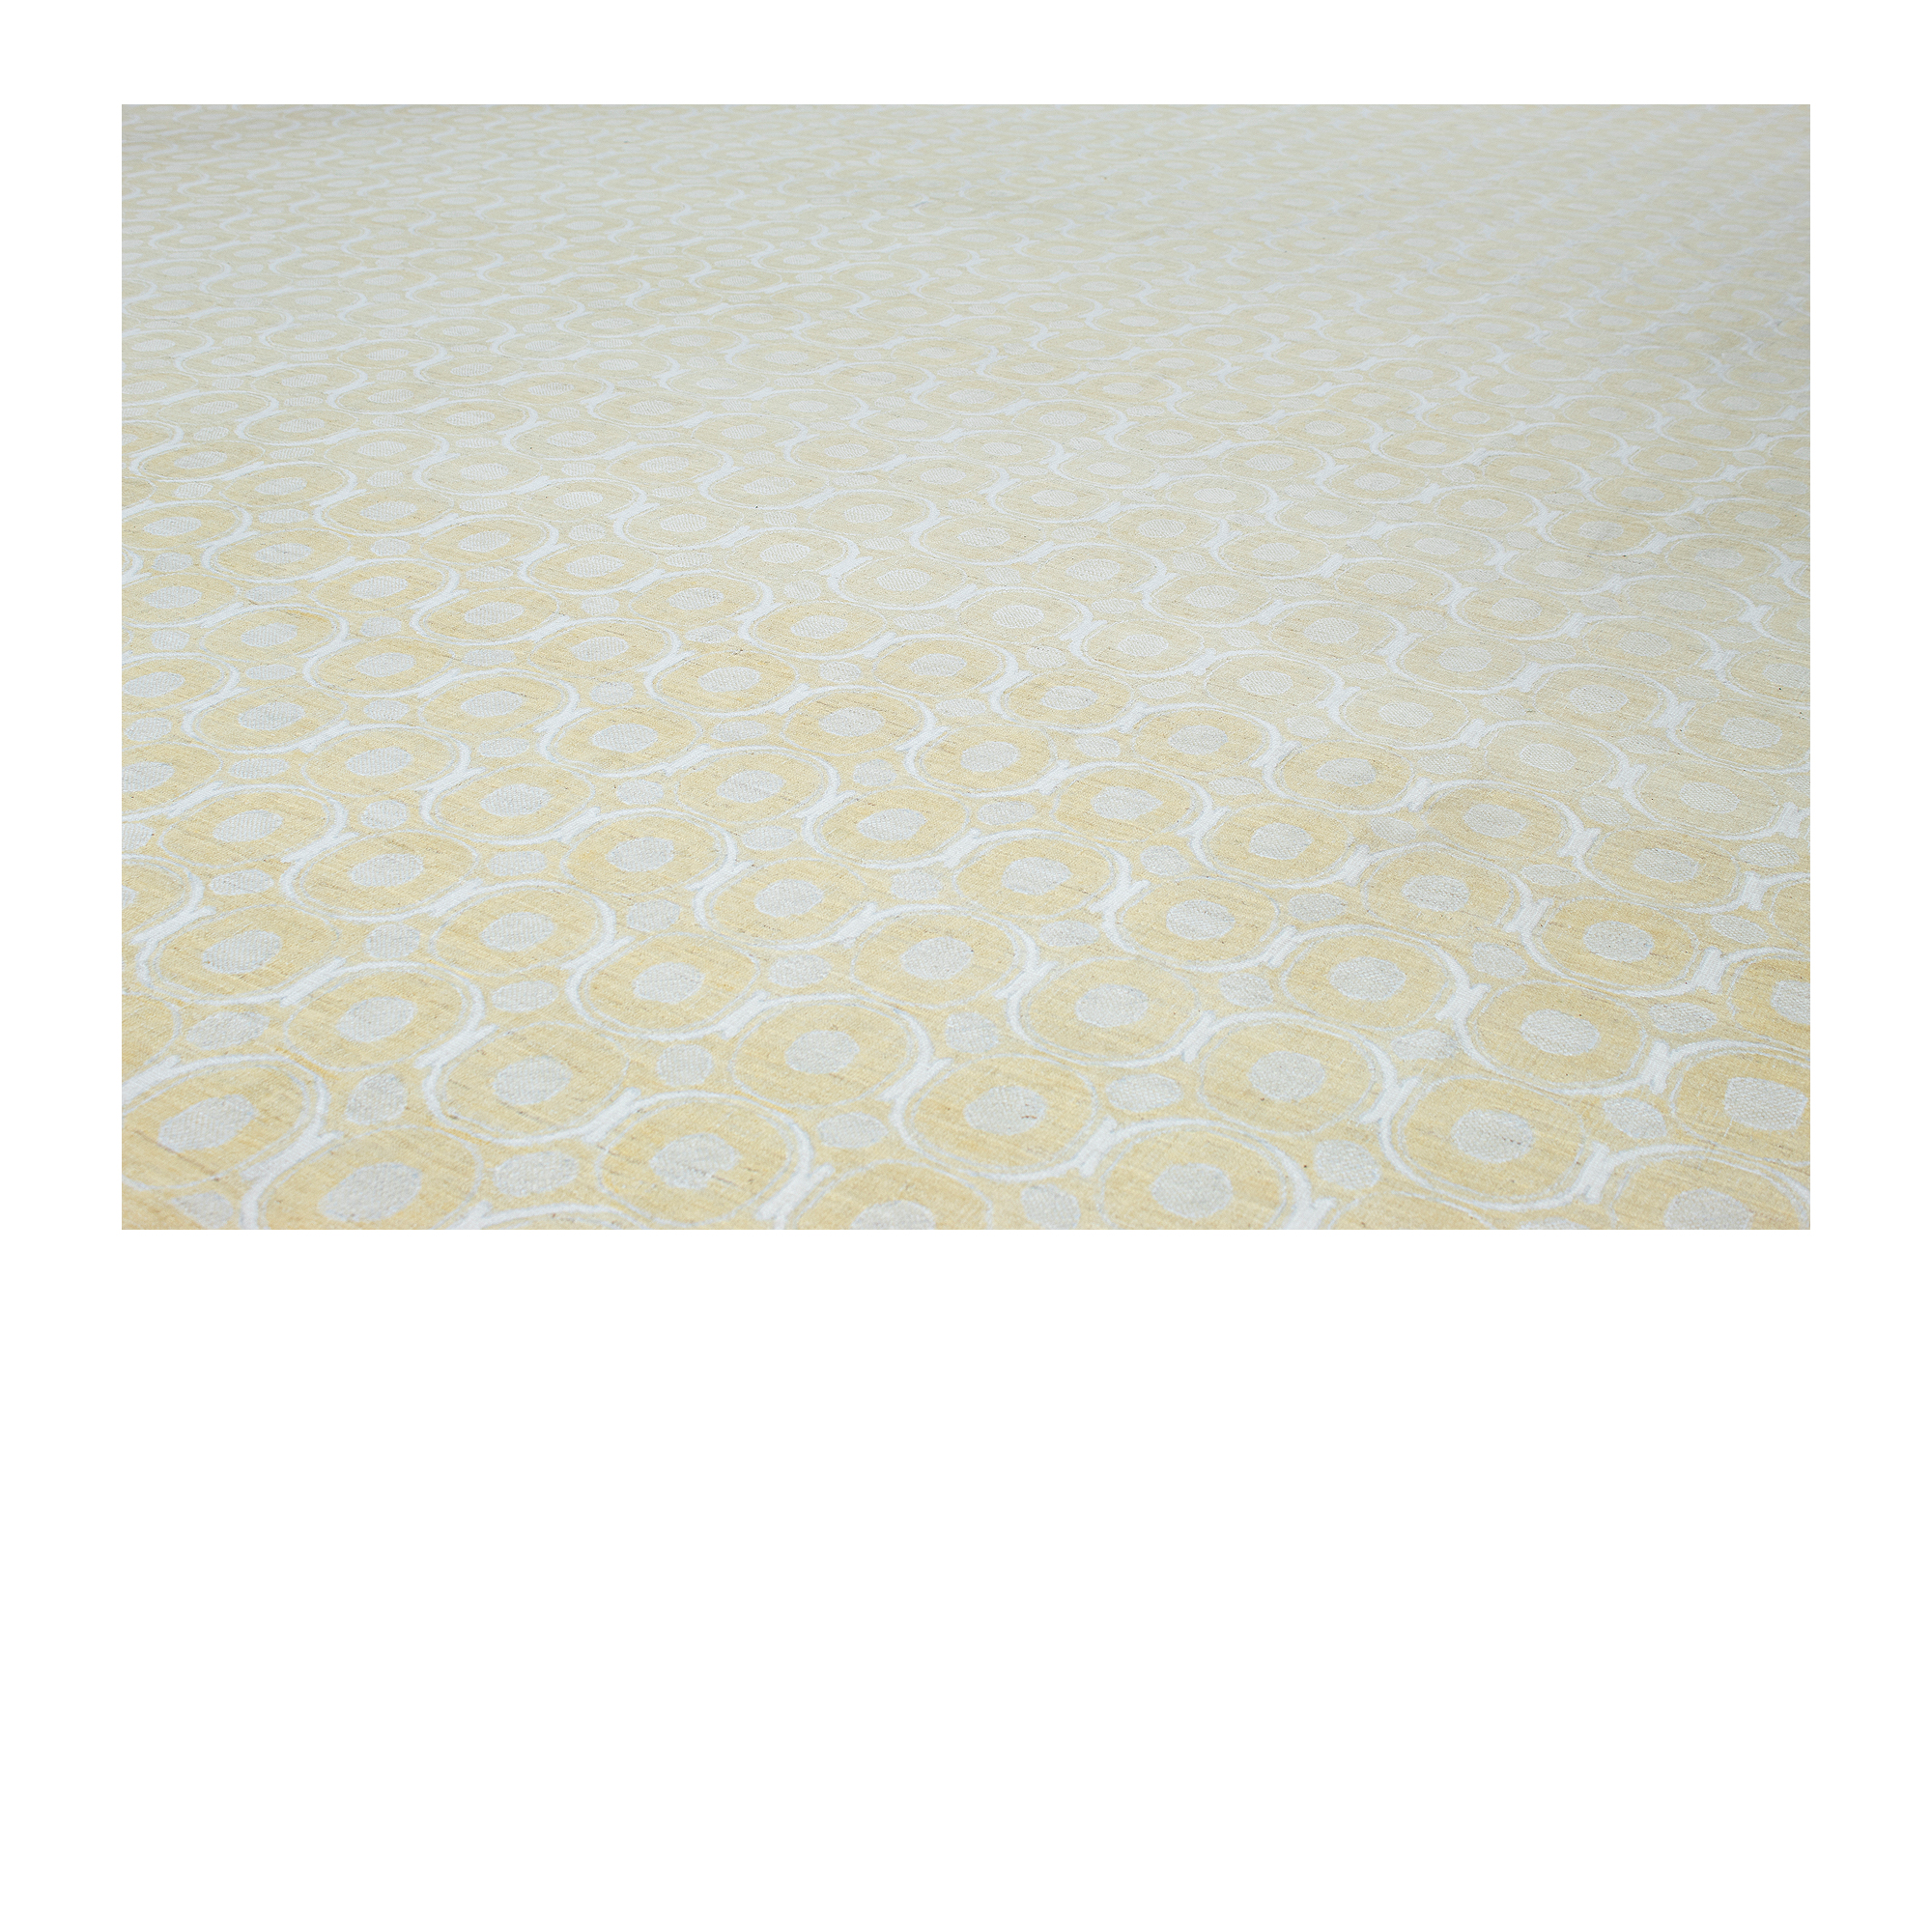 Our Lolly rug is handknotted from the finest hand-carded, hand-spun, naturally dyed wool.